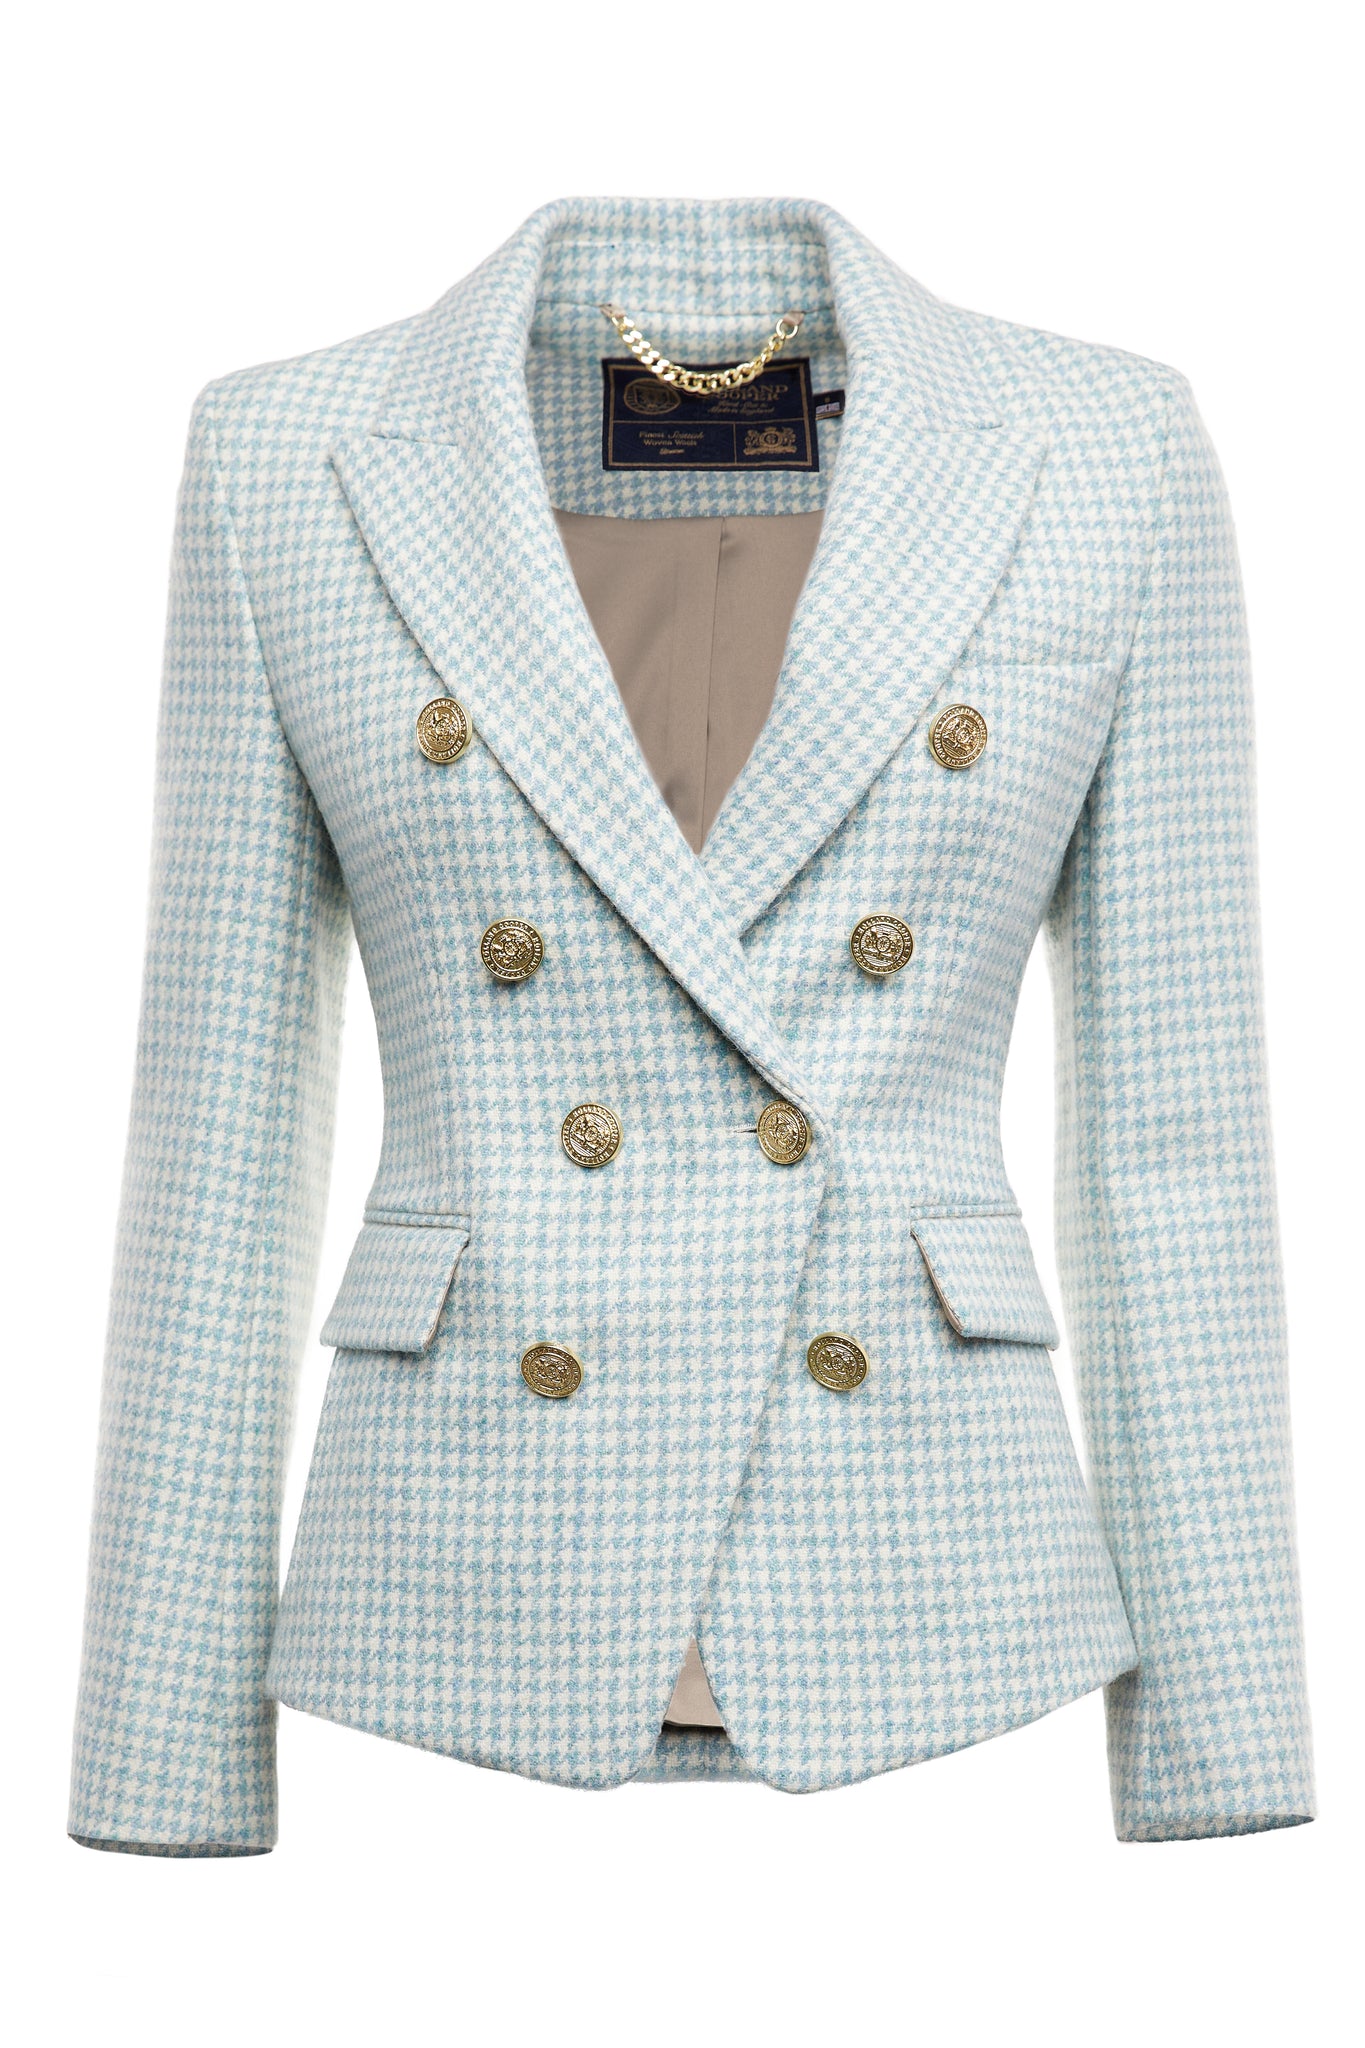 The Teal Houndstooth Suit